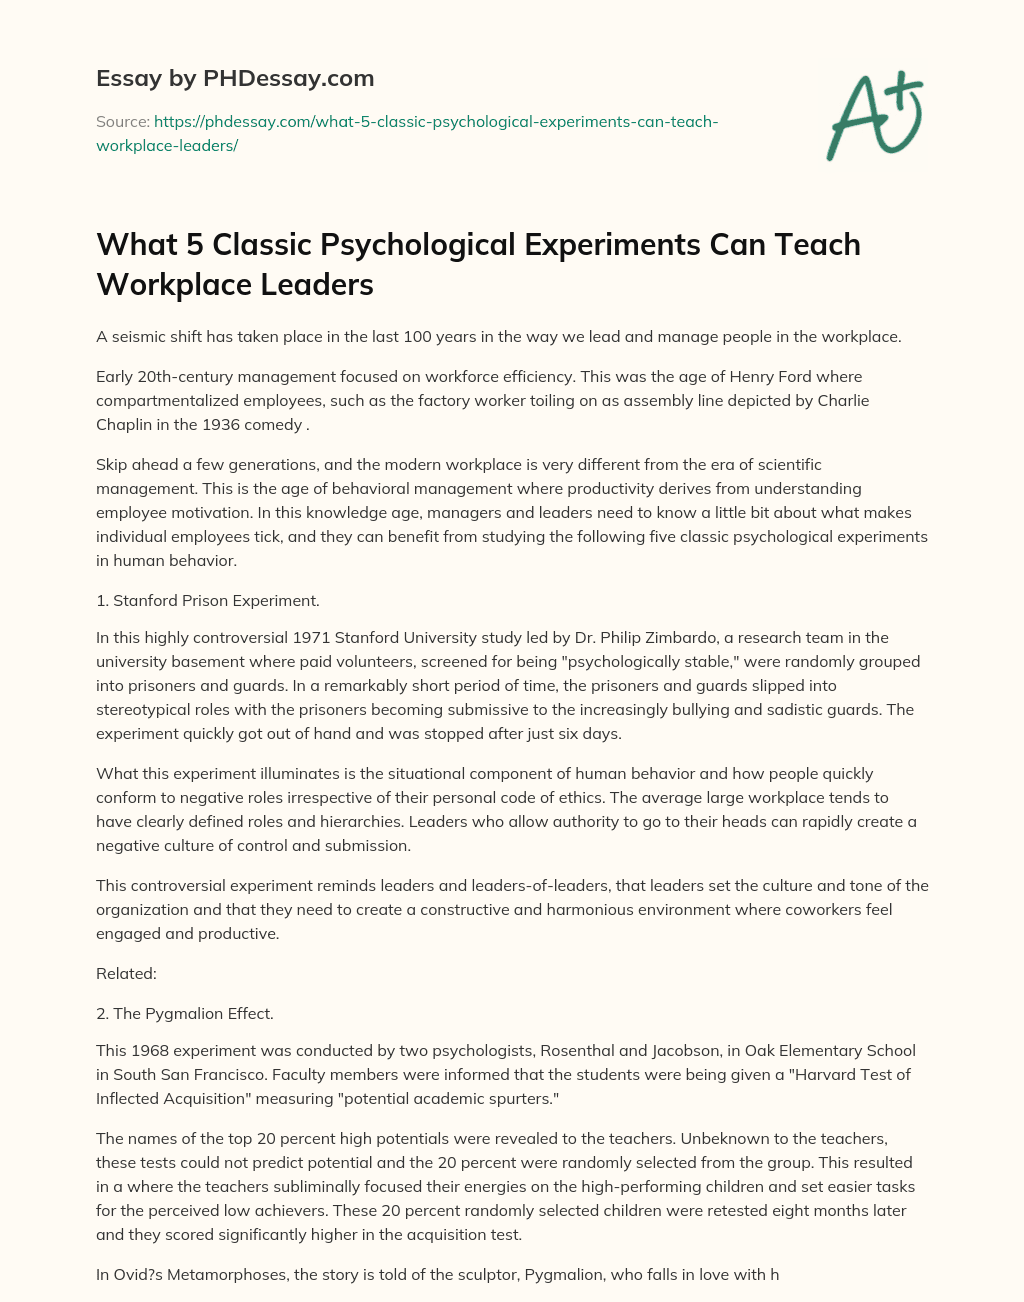 What 5 Classic Psychological Experiments Can Teach Workplace Leaders essay